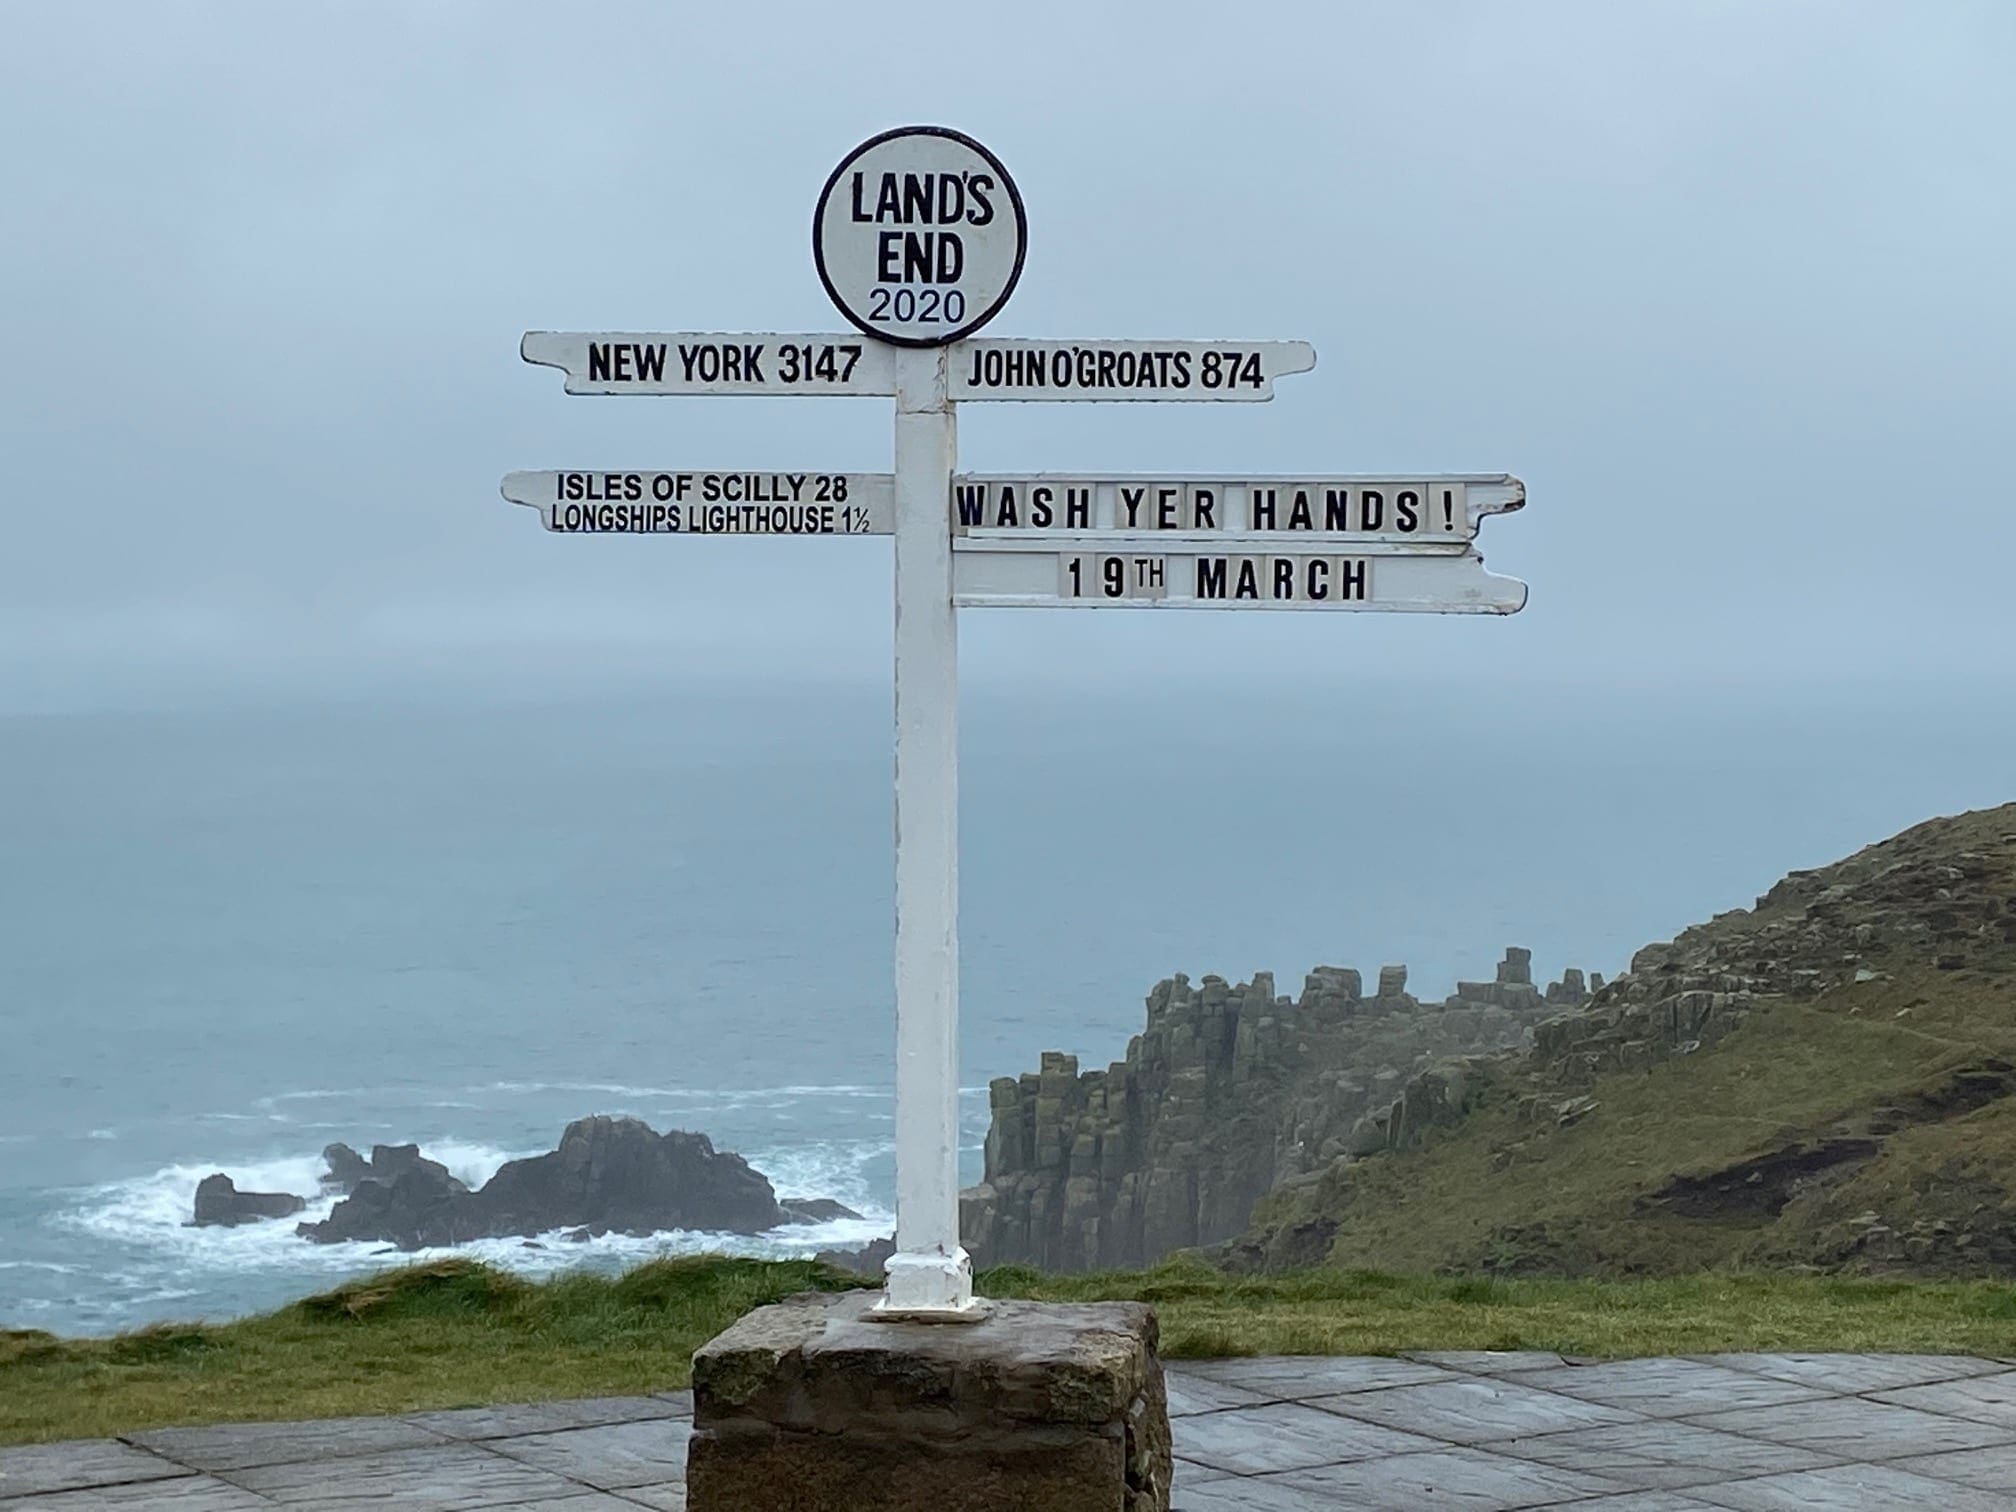 Lands End cORNWALL hOLIDAY